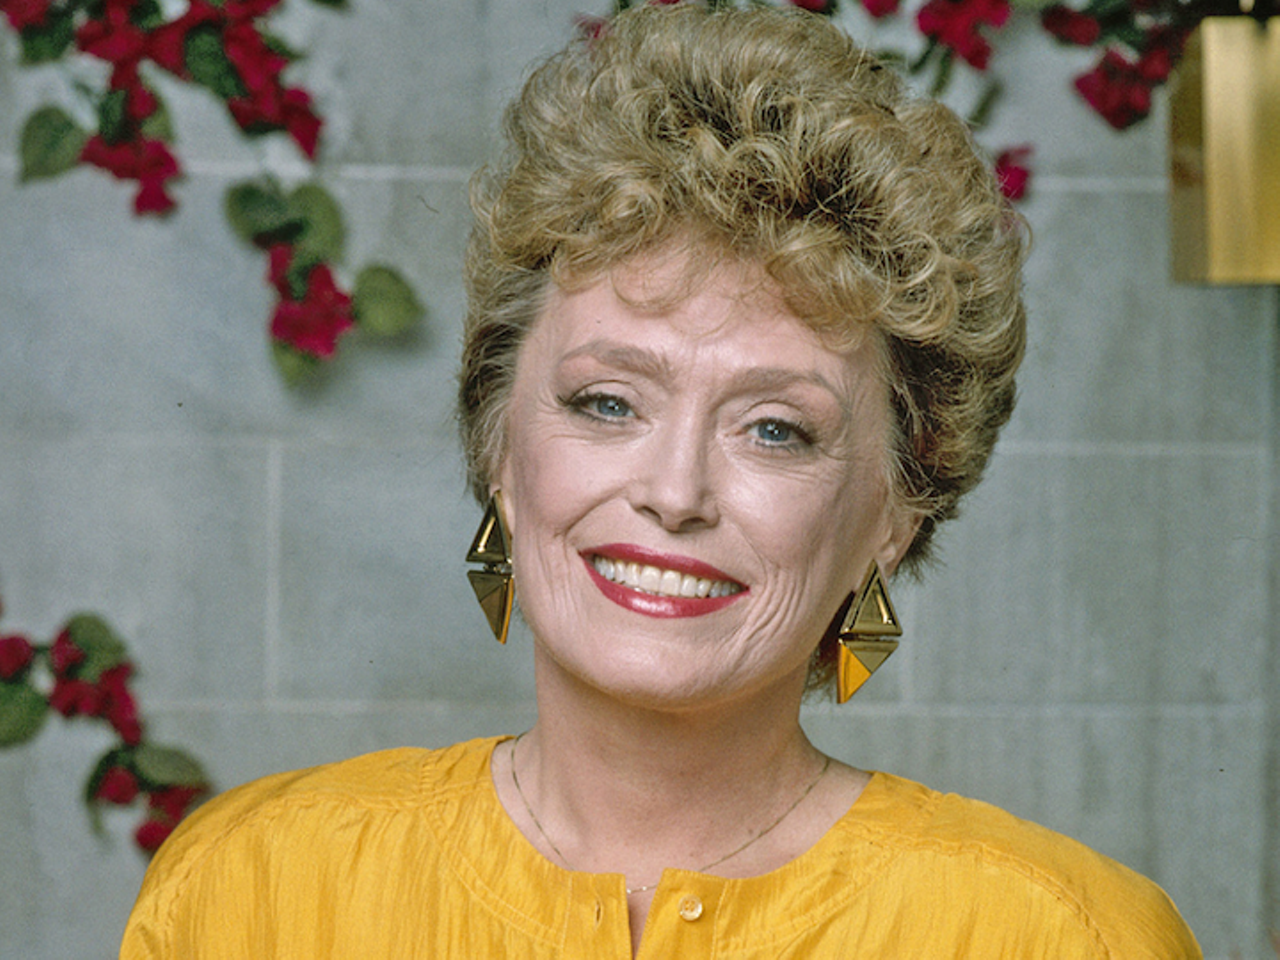 6: The Golden Girls&#146; Blanche Devereaux
Television is filled to the brim with young women pursuing a life of promiscuity, but having someone like Blanche in the public eye reminded the world that some desires don&#146;t need to be pushed aside when you reach old age. The Miamian&#146;s snappy remarks and her stylish fashion made her someone to look up to no matter what point in your life you found yourself in.
Photo via NBC